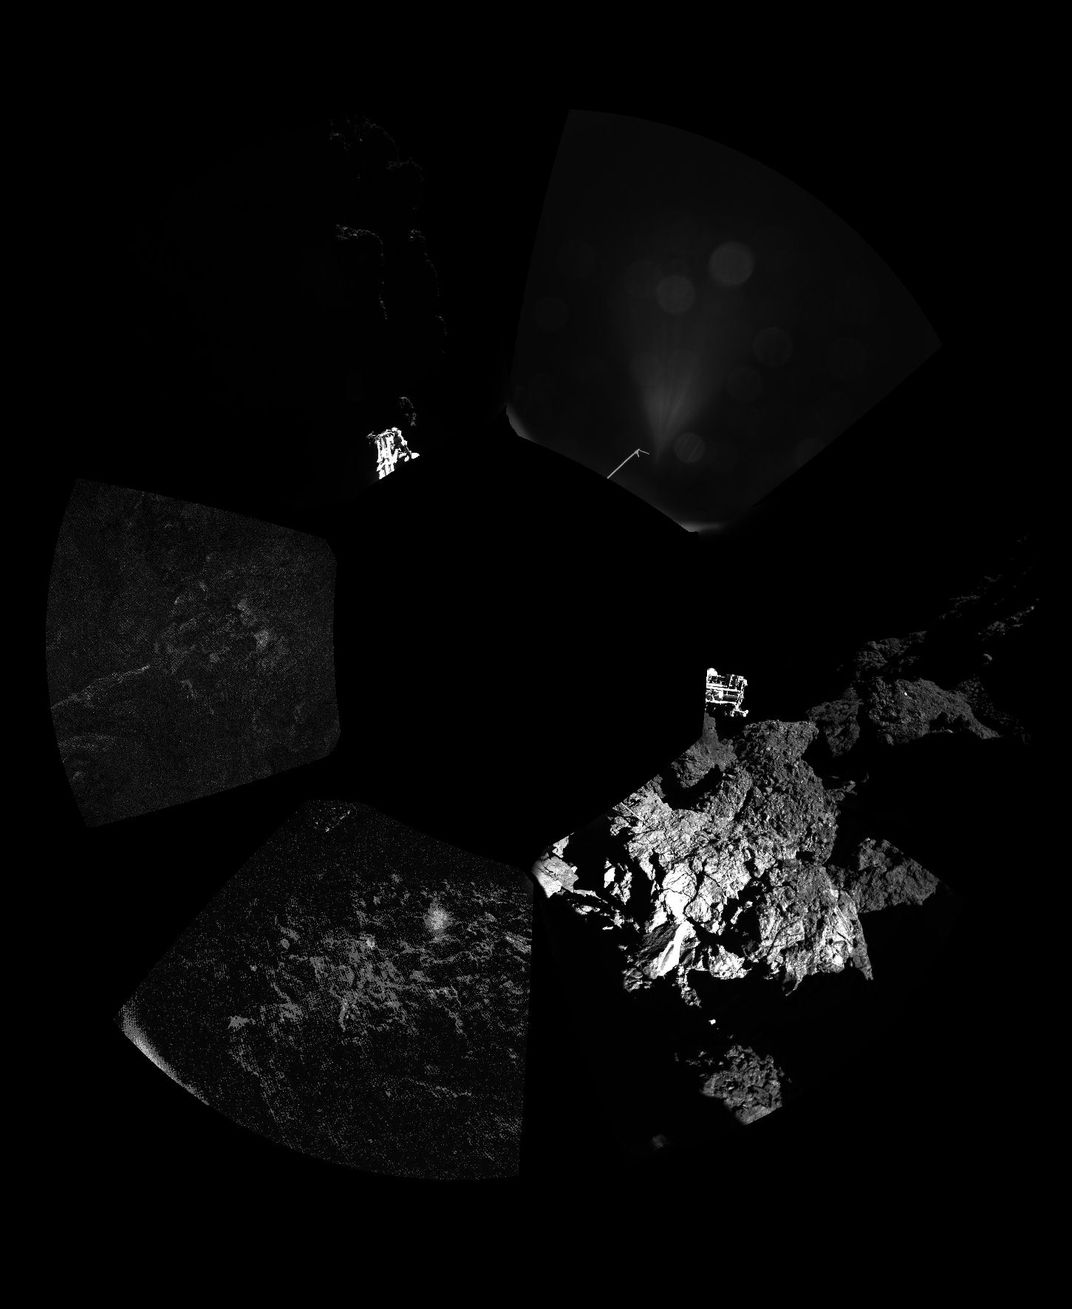 The first panoramic image from the surface of a comet, unprocessed, shows a 360 degree view around Philae -- the lander's feet are visible in some frames, credit: ESA/Rosetta/Philae/CIVA